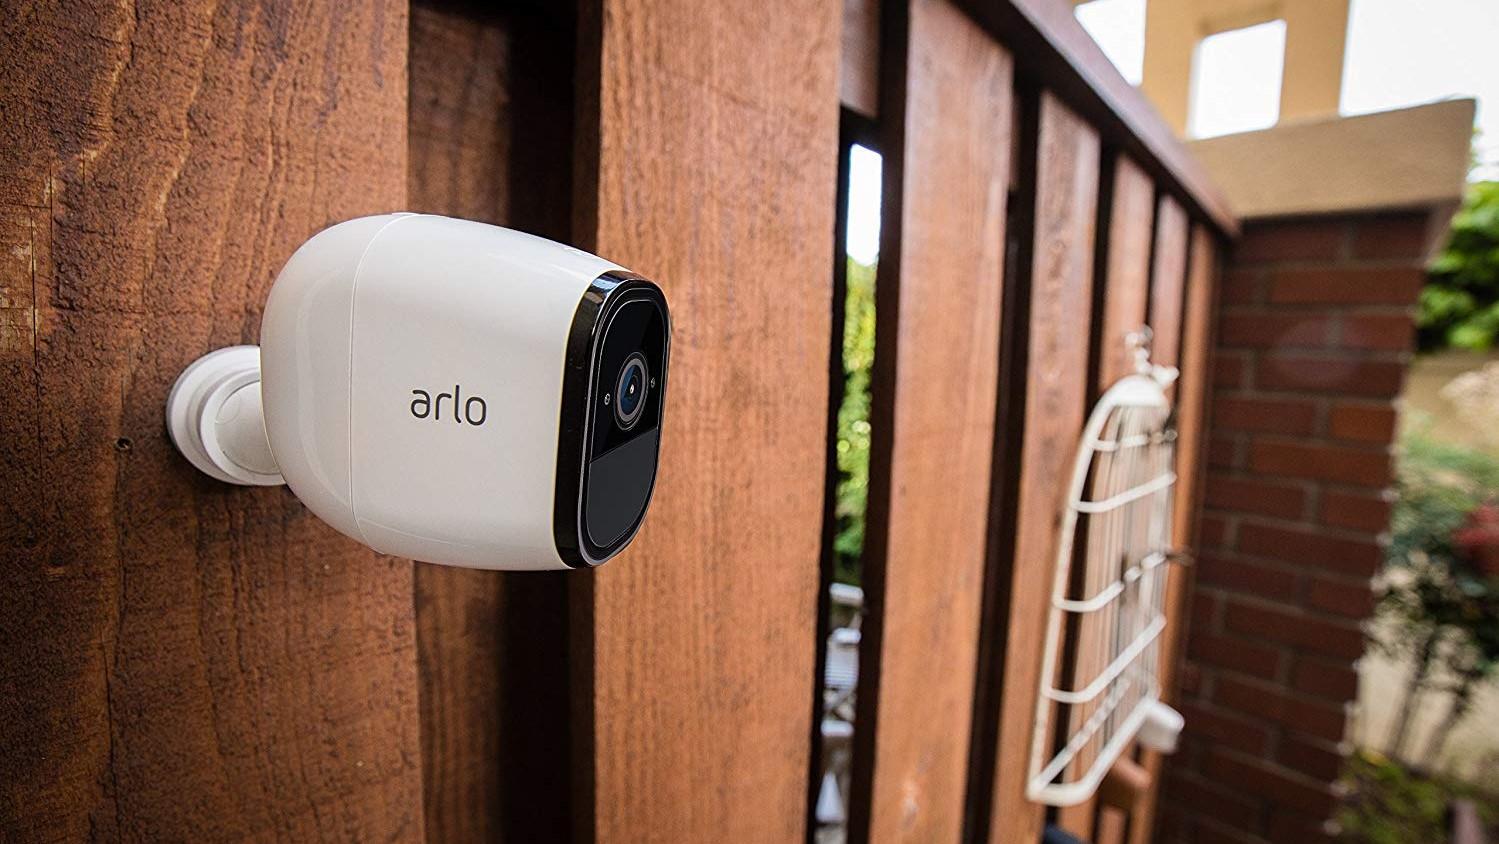 The Arlo Pro information    camera attached to a wall.